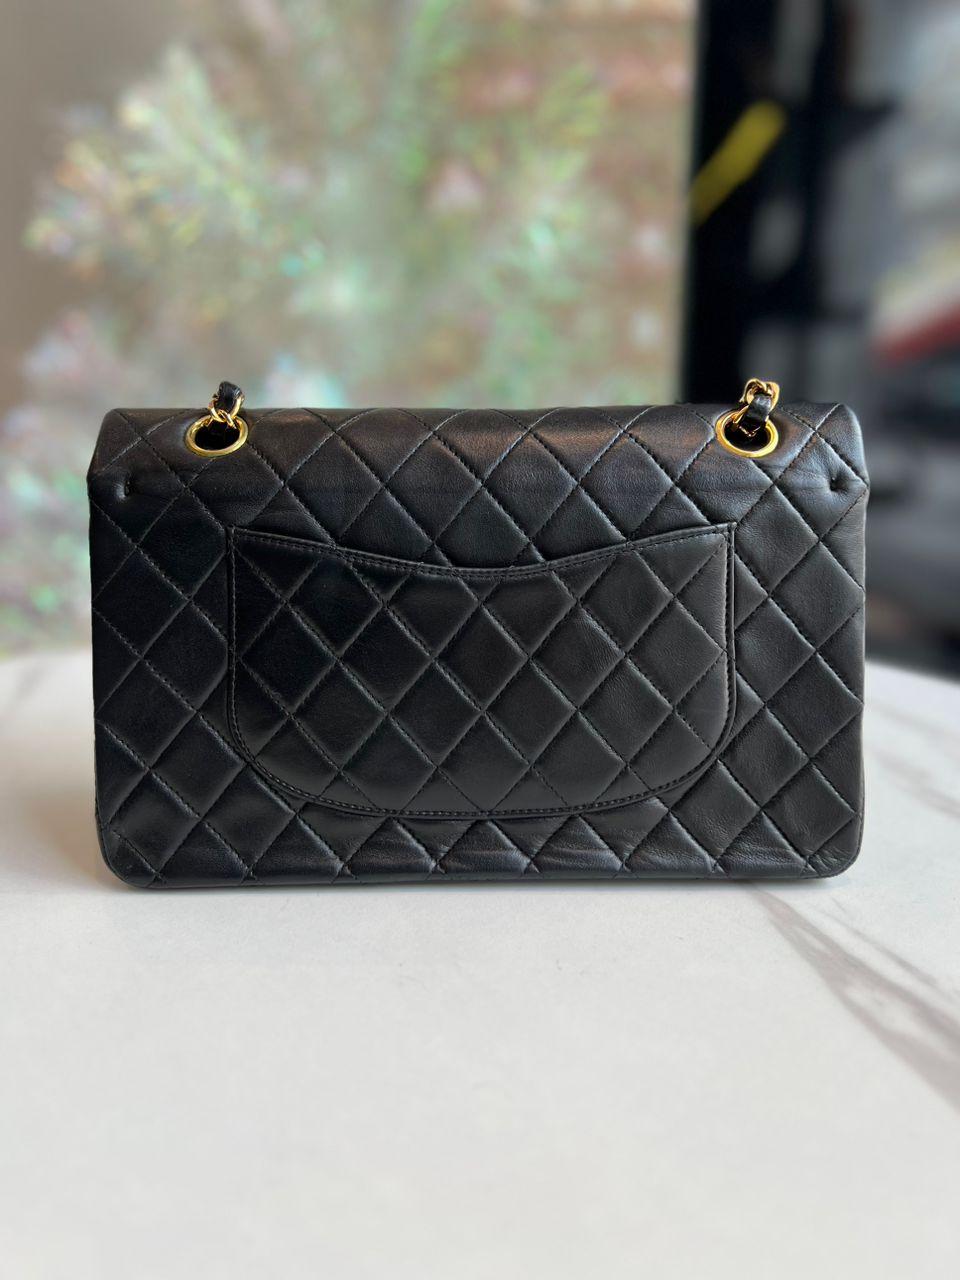 Chanel Vintage Black Quilted Lambskin Classic Medium